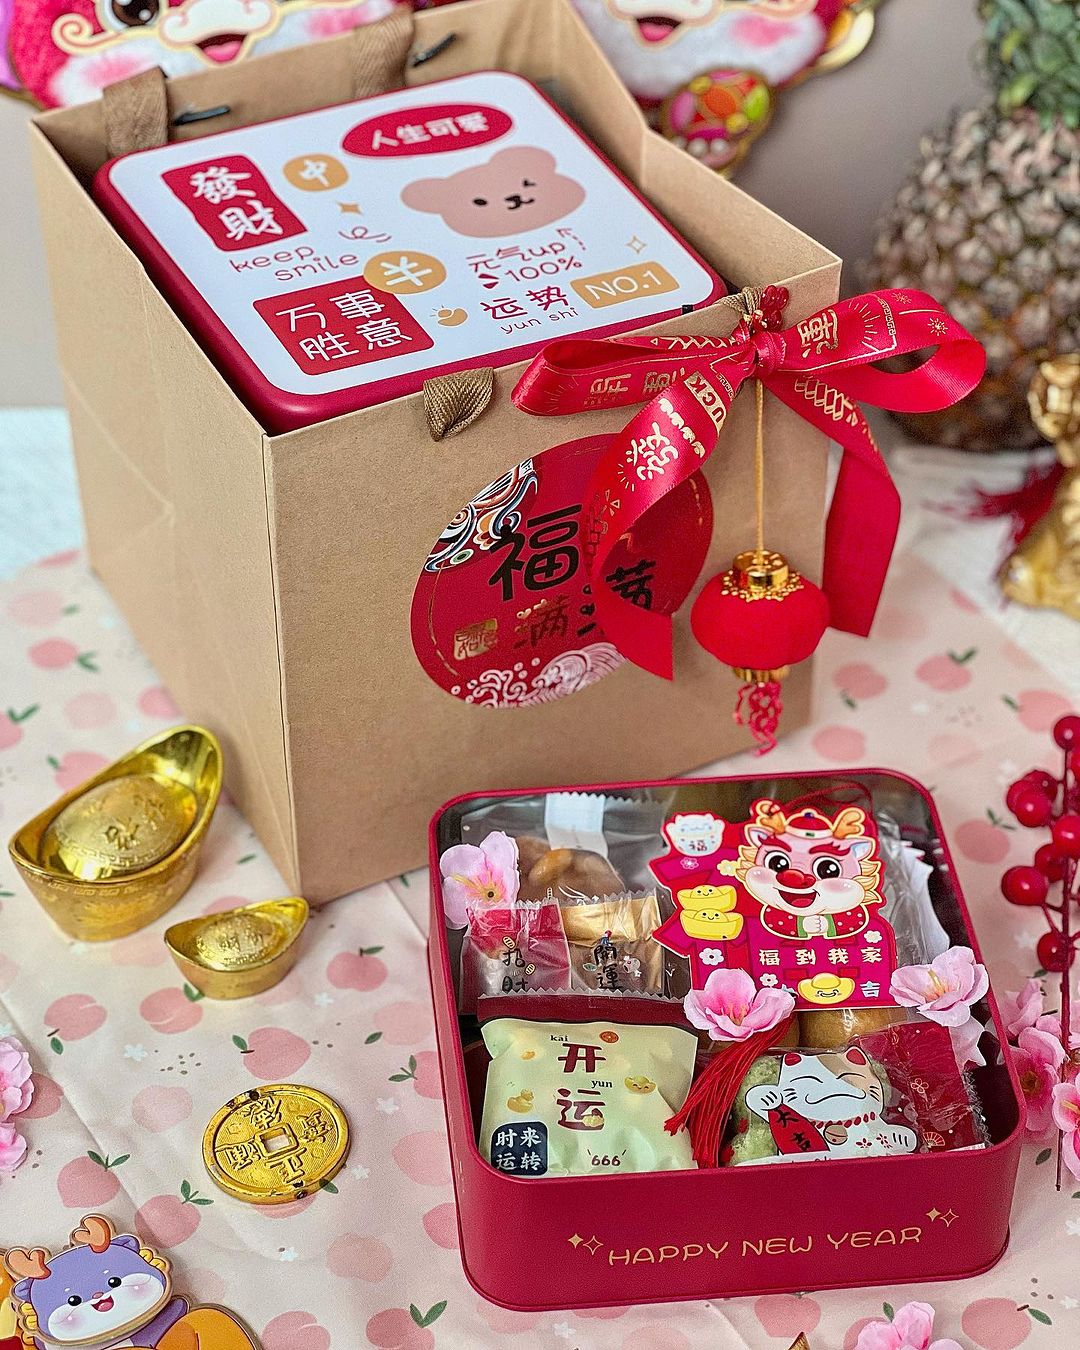 Fortune Dragon Gift Set by Pikadee Flower Cake - CNY gift sets and boxes